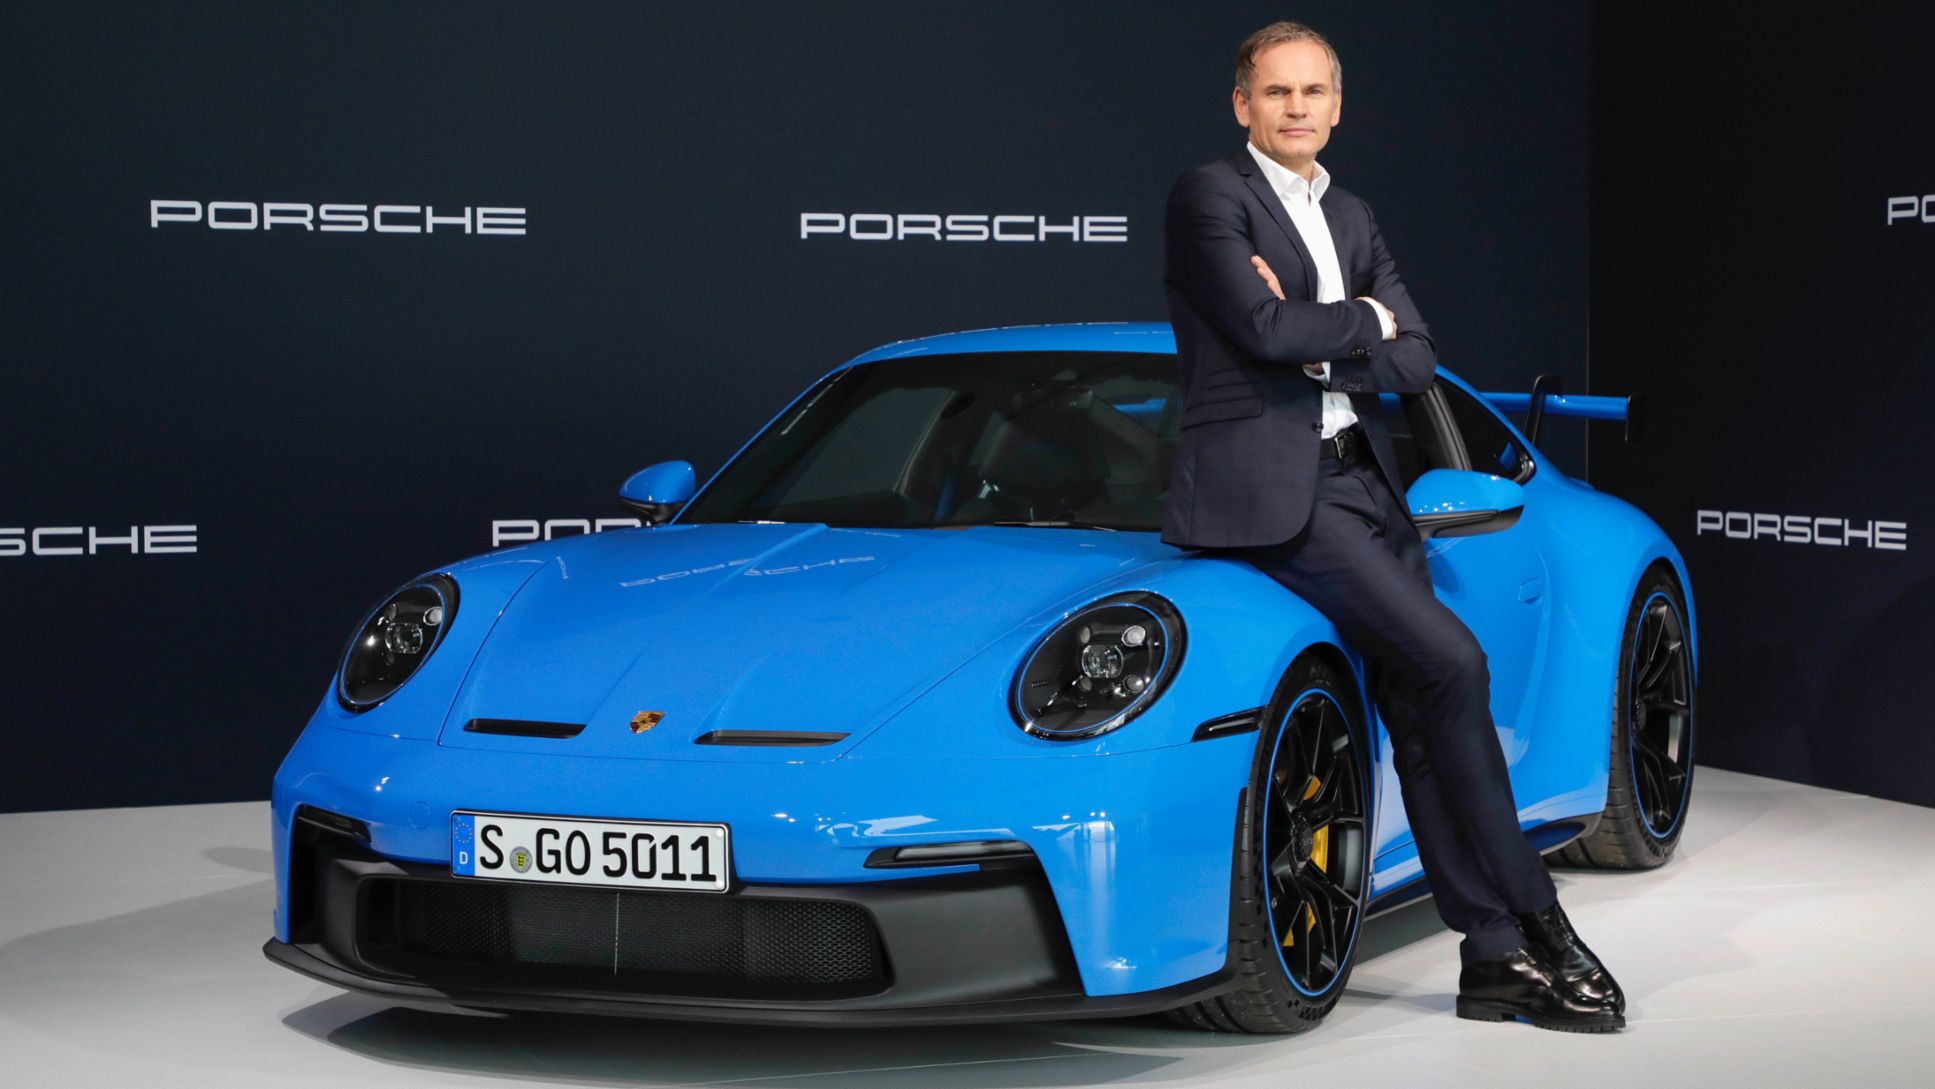 Oliver Blume, Chairman of the Executive Board of Dr. Ing. h.c. F. Porsche AG, 911 GT3, Annual Press Conference, 2021, Porsche AG